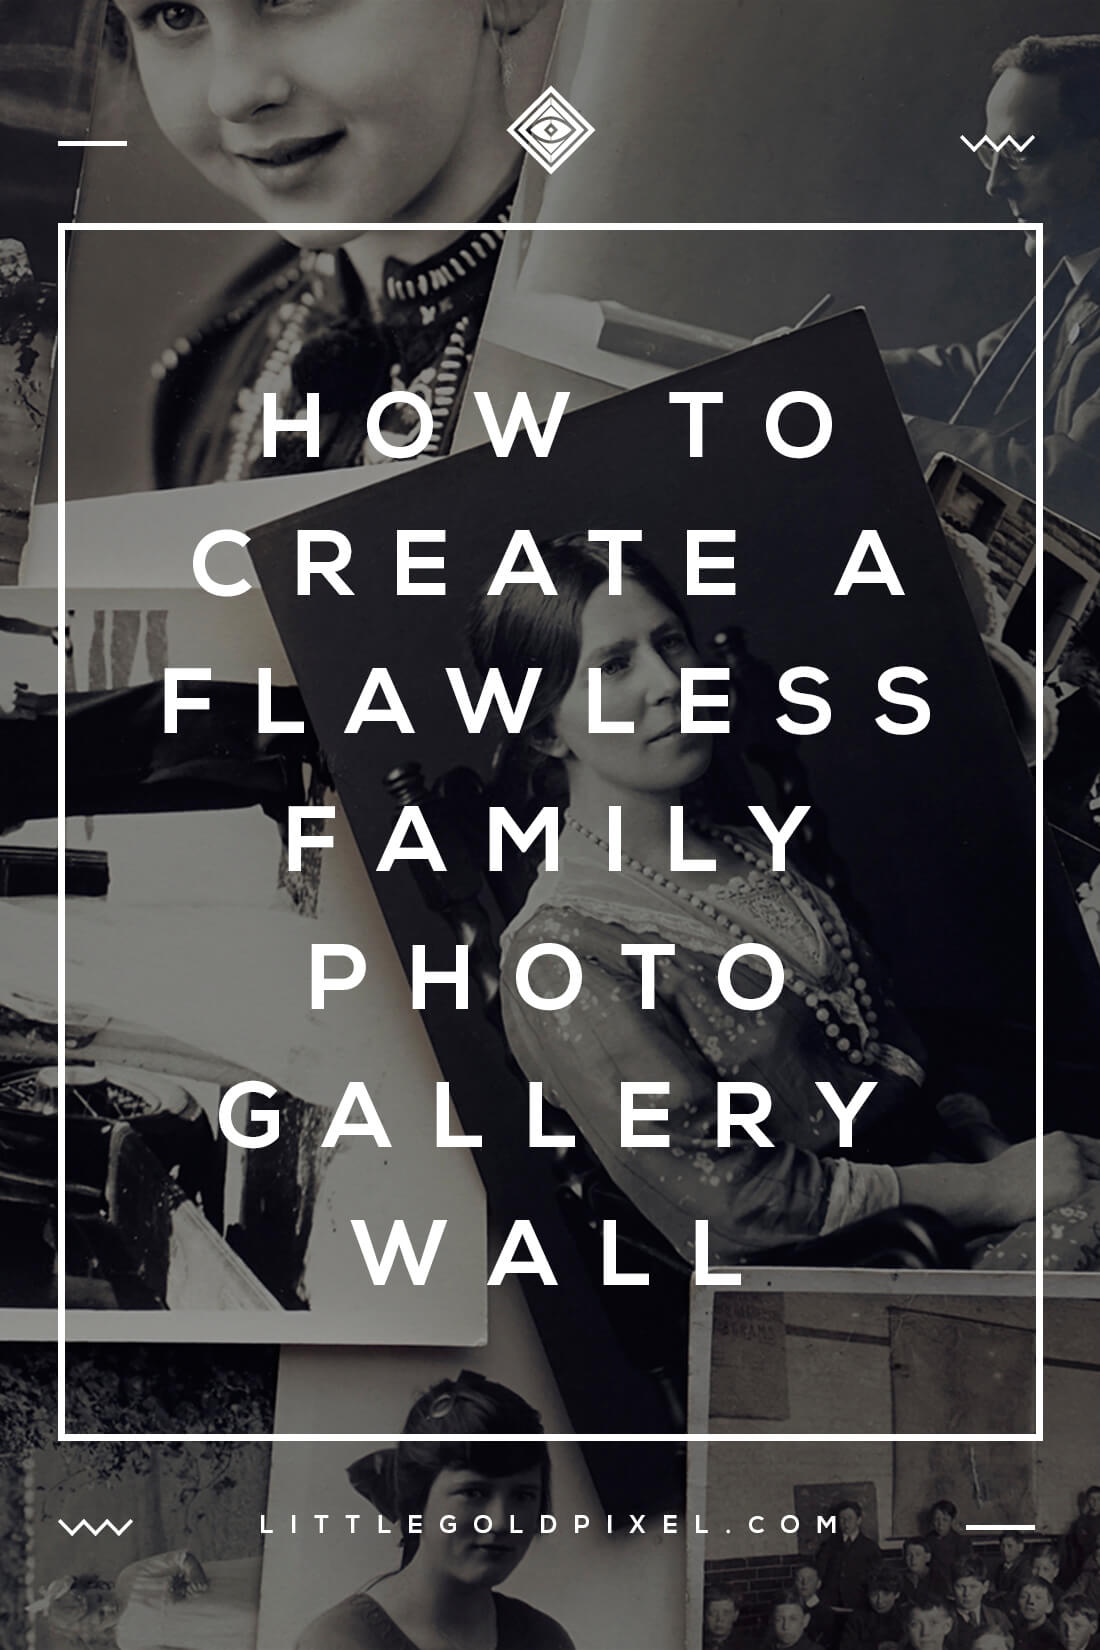 How to Create a Flawless Family Photo Gallery Wall in 5 Easy Steps • Little Gold Pixel • Follow these 5 steps to create a flawless family photo gallery wall. It's easier than you might think to take your mismatched memories and make them chic. #familyphotos #gallerywall #gallerywallideas